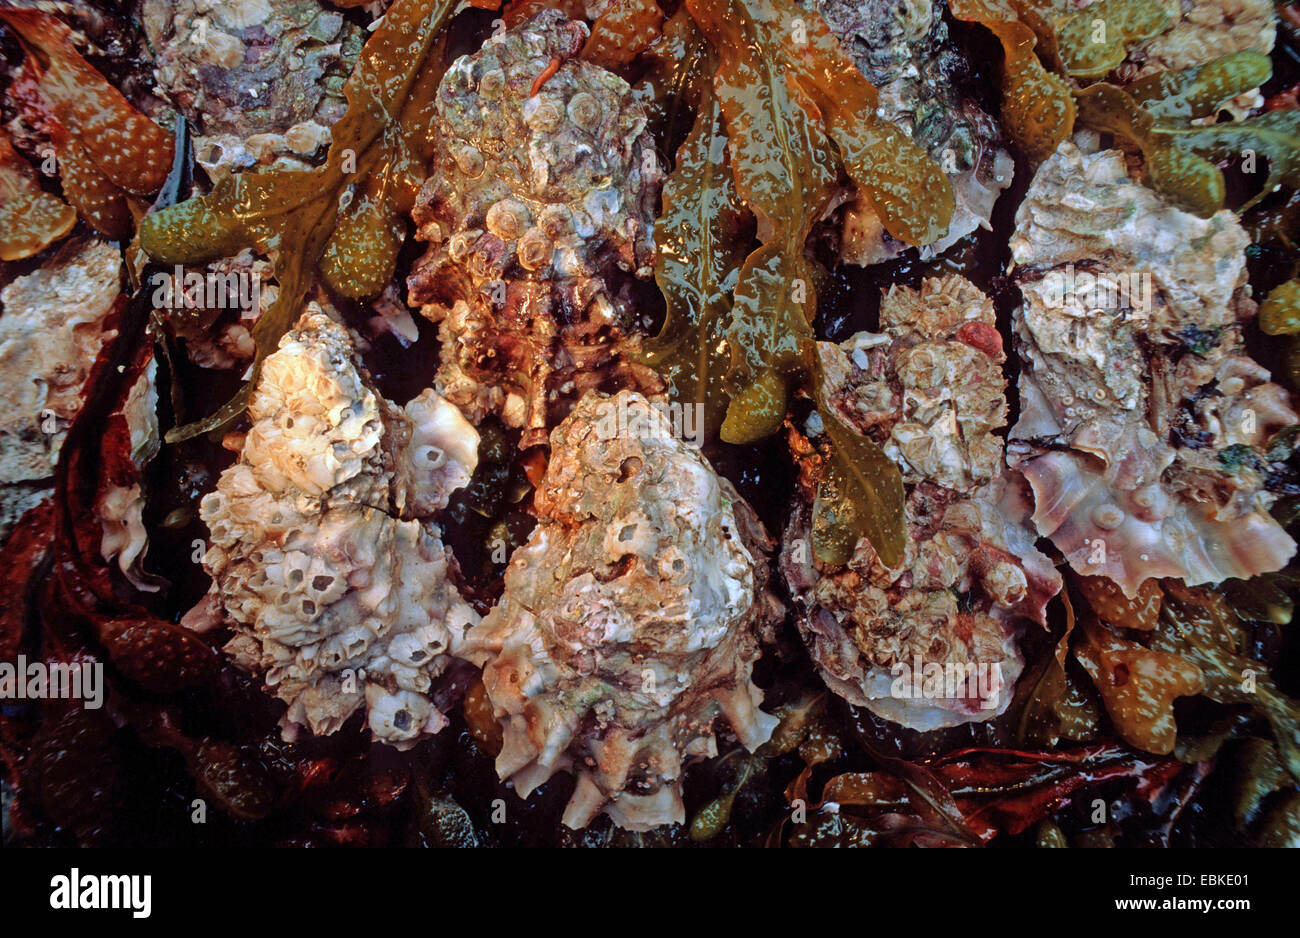 Pacific oyster, giant Pacific oyster, Japanese oyster (Crassostrea gigas), several animals at a rock Stock Photo